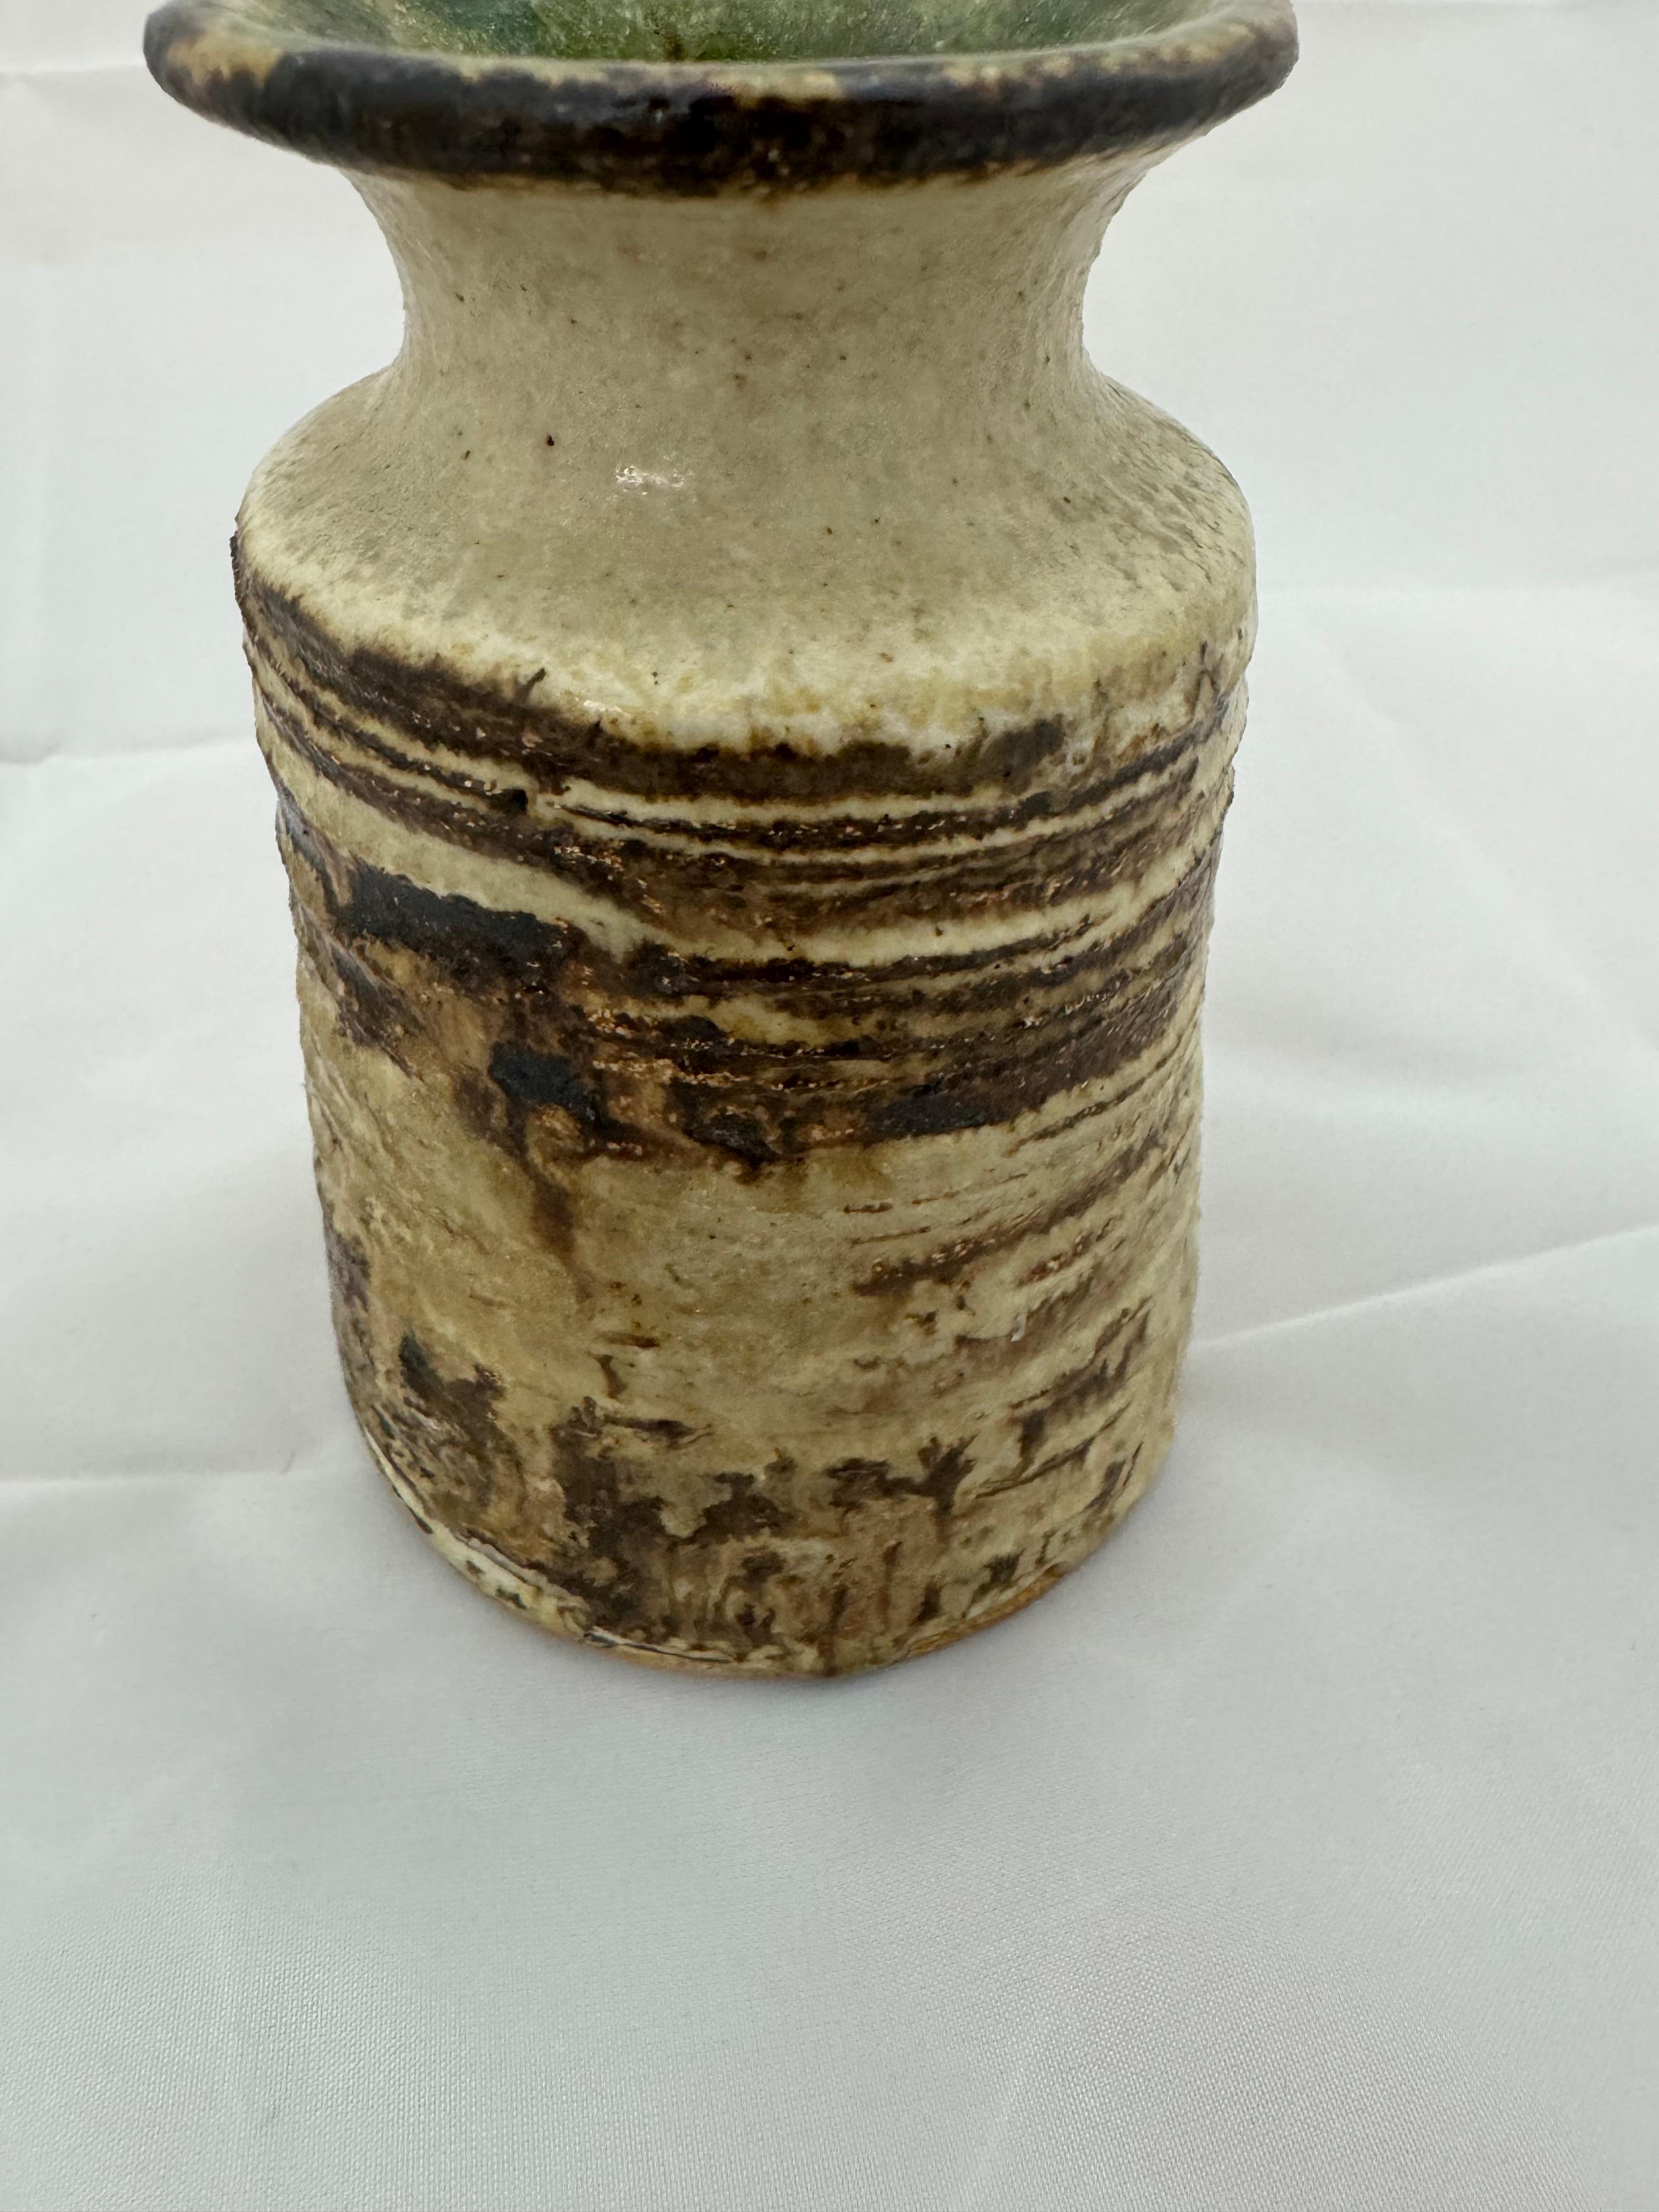 Nice vase to add to your pottery collection